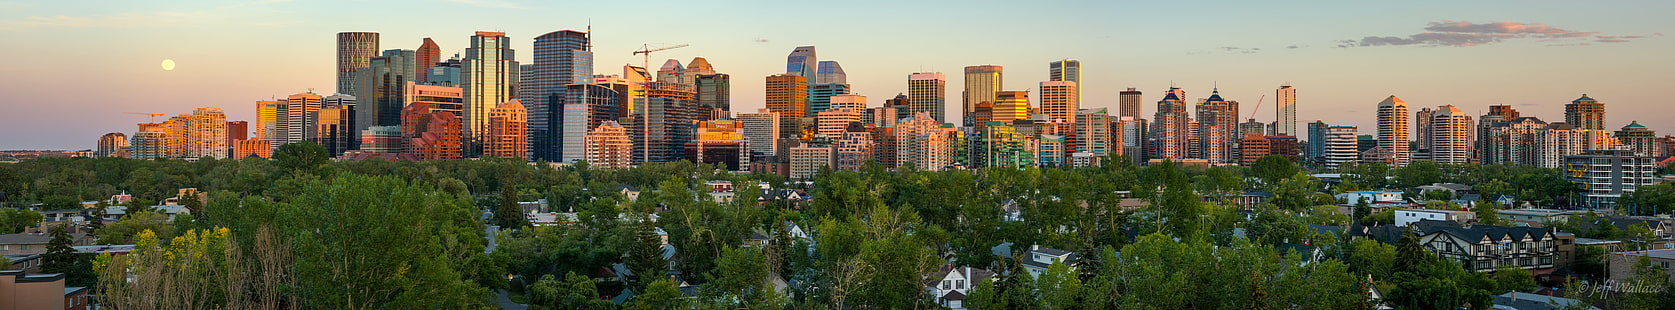 panoramic view of city buildings, calgary, calgary, Calgary, Explored, view, city, buildings, pano, skyline, Alberta, Canada, CA, Moon, cityscape, summer, architecture, urban Skyline, skyscraper, downtown District, urban Scene, uSA, building Exterior, built Structure, sunset, HD wallpaper HD wallpaper